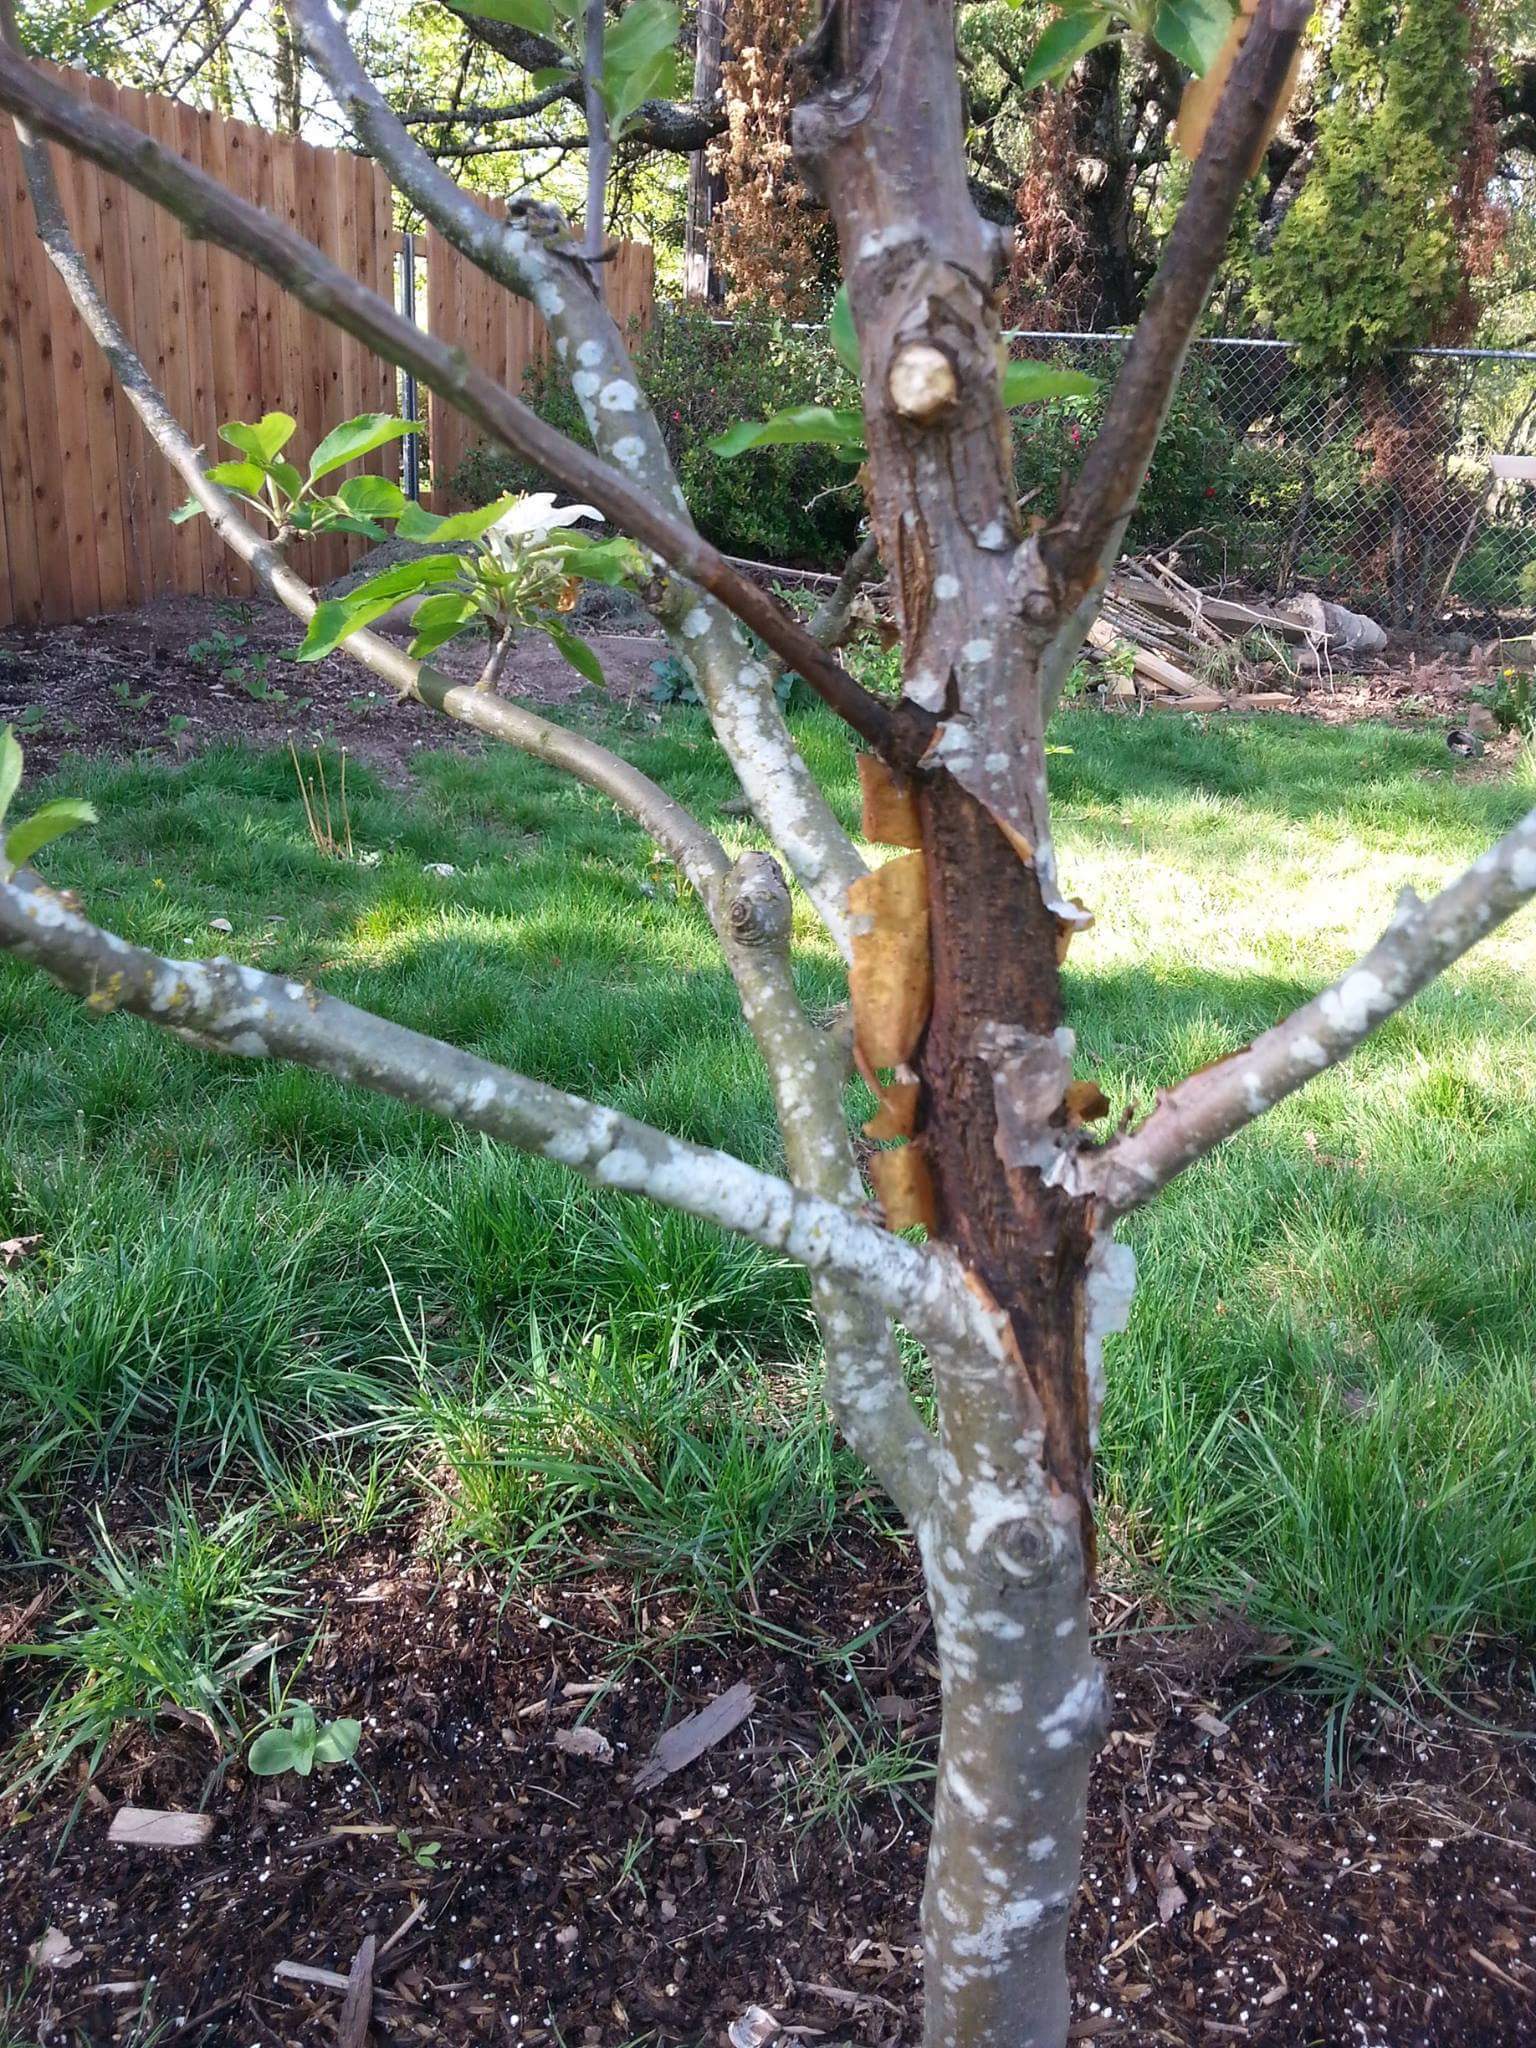 What To Do If Your Tree Is Shedding Bark?